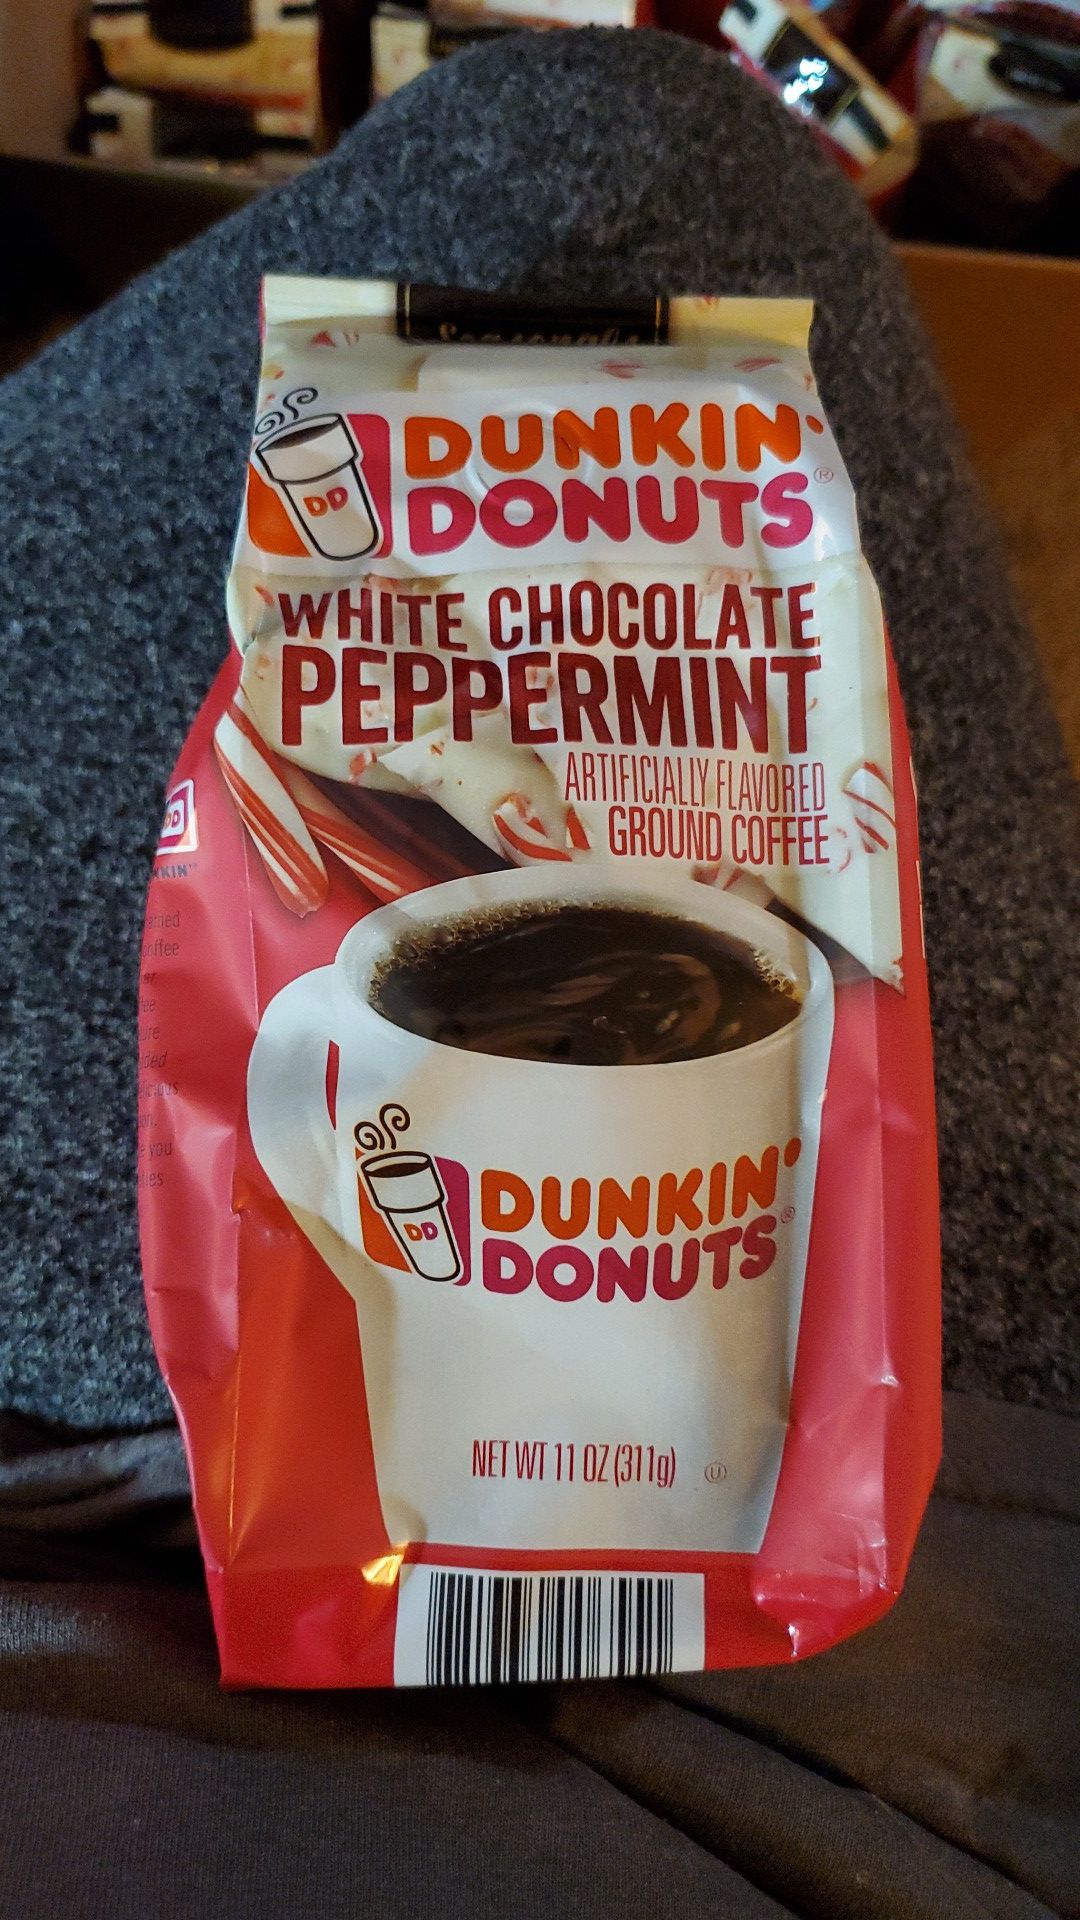 Dunkin Donuts white chocolate peppermint ground coffee 11oz bag expiration August 18th 2020 $4 ea